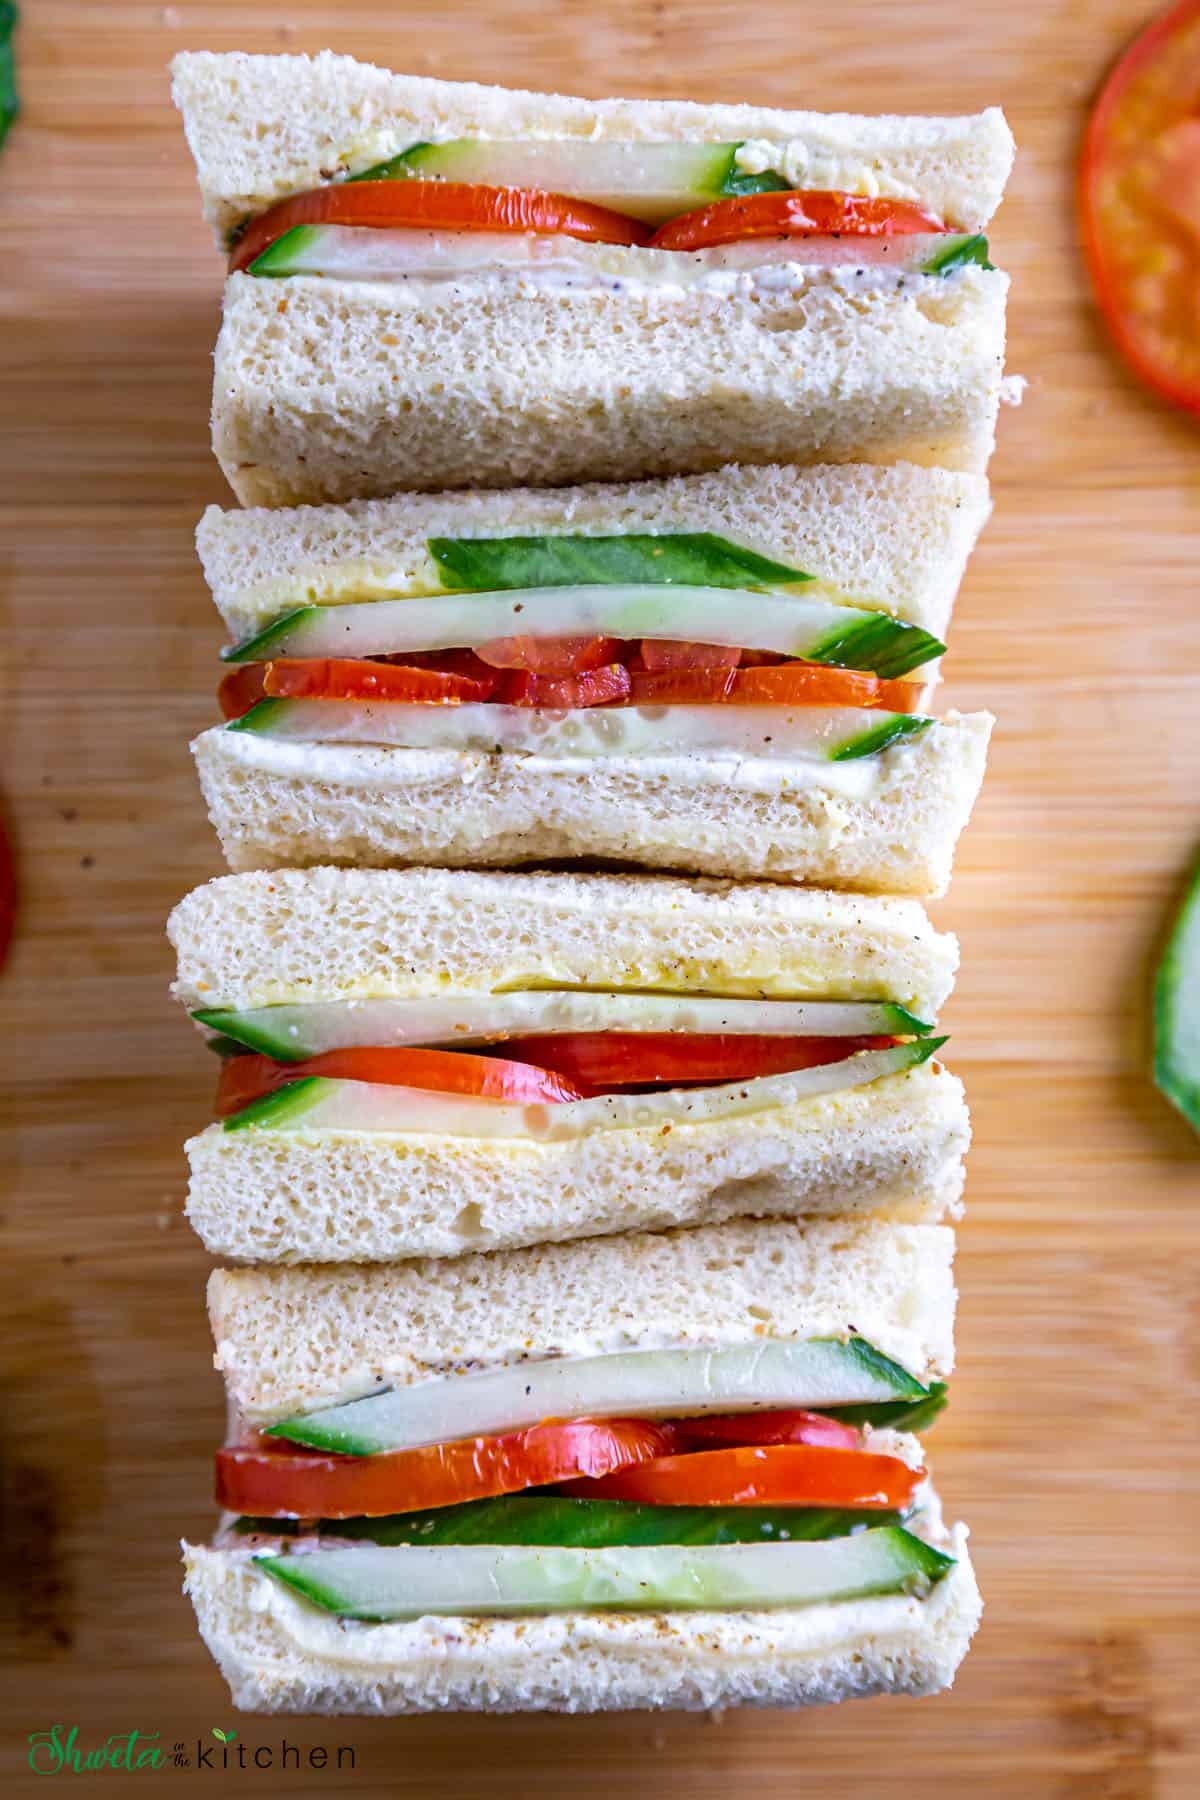 Top view of cucumber and tomato sandwiches placed inline on a wooden board